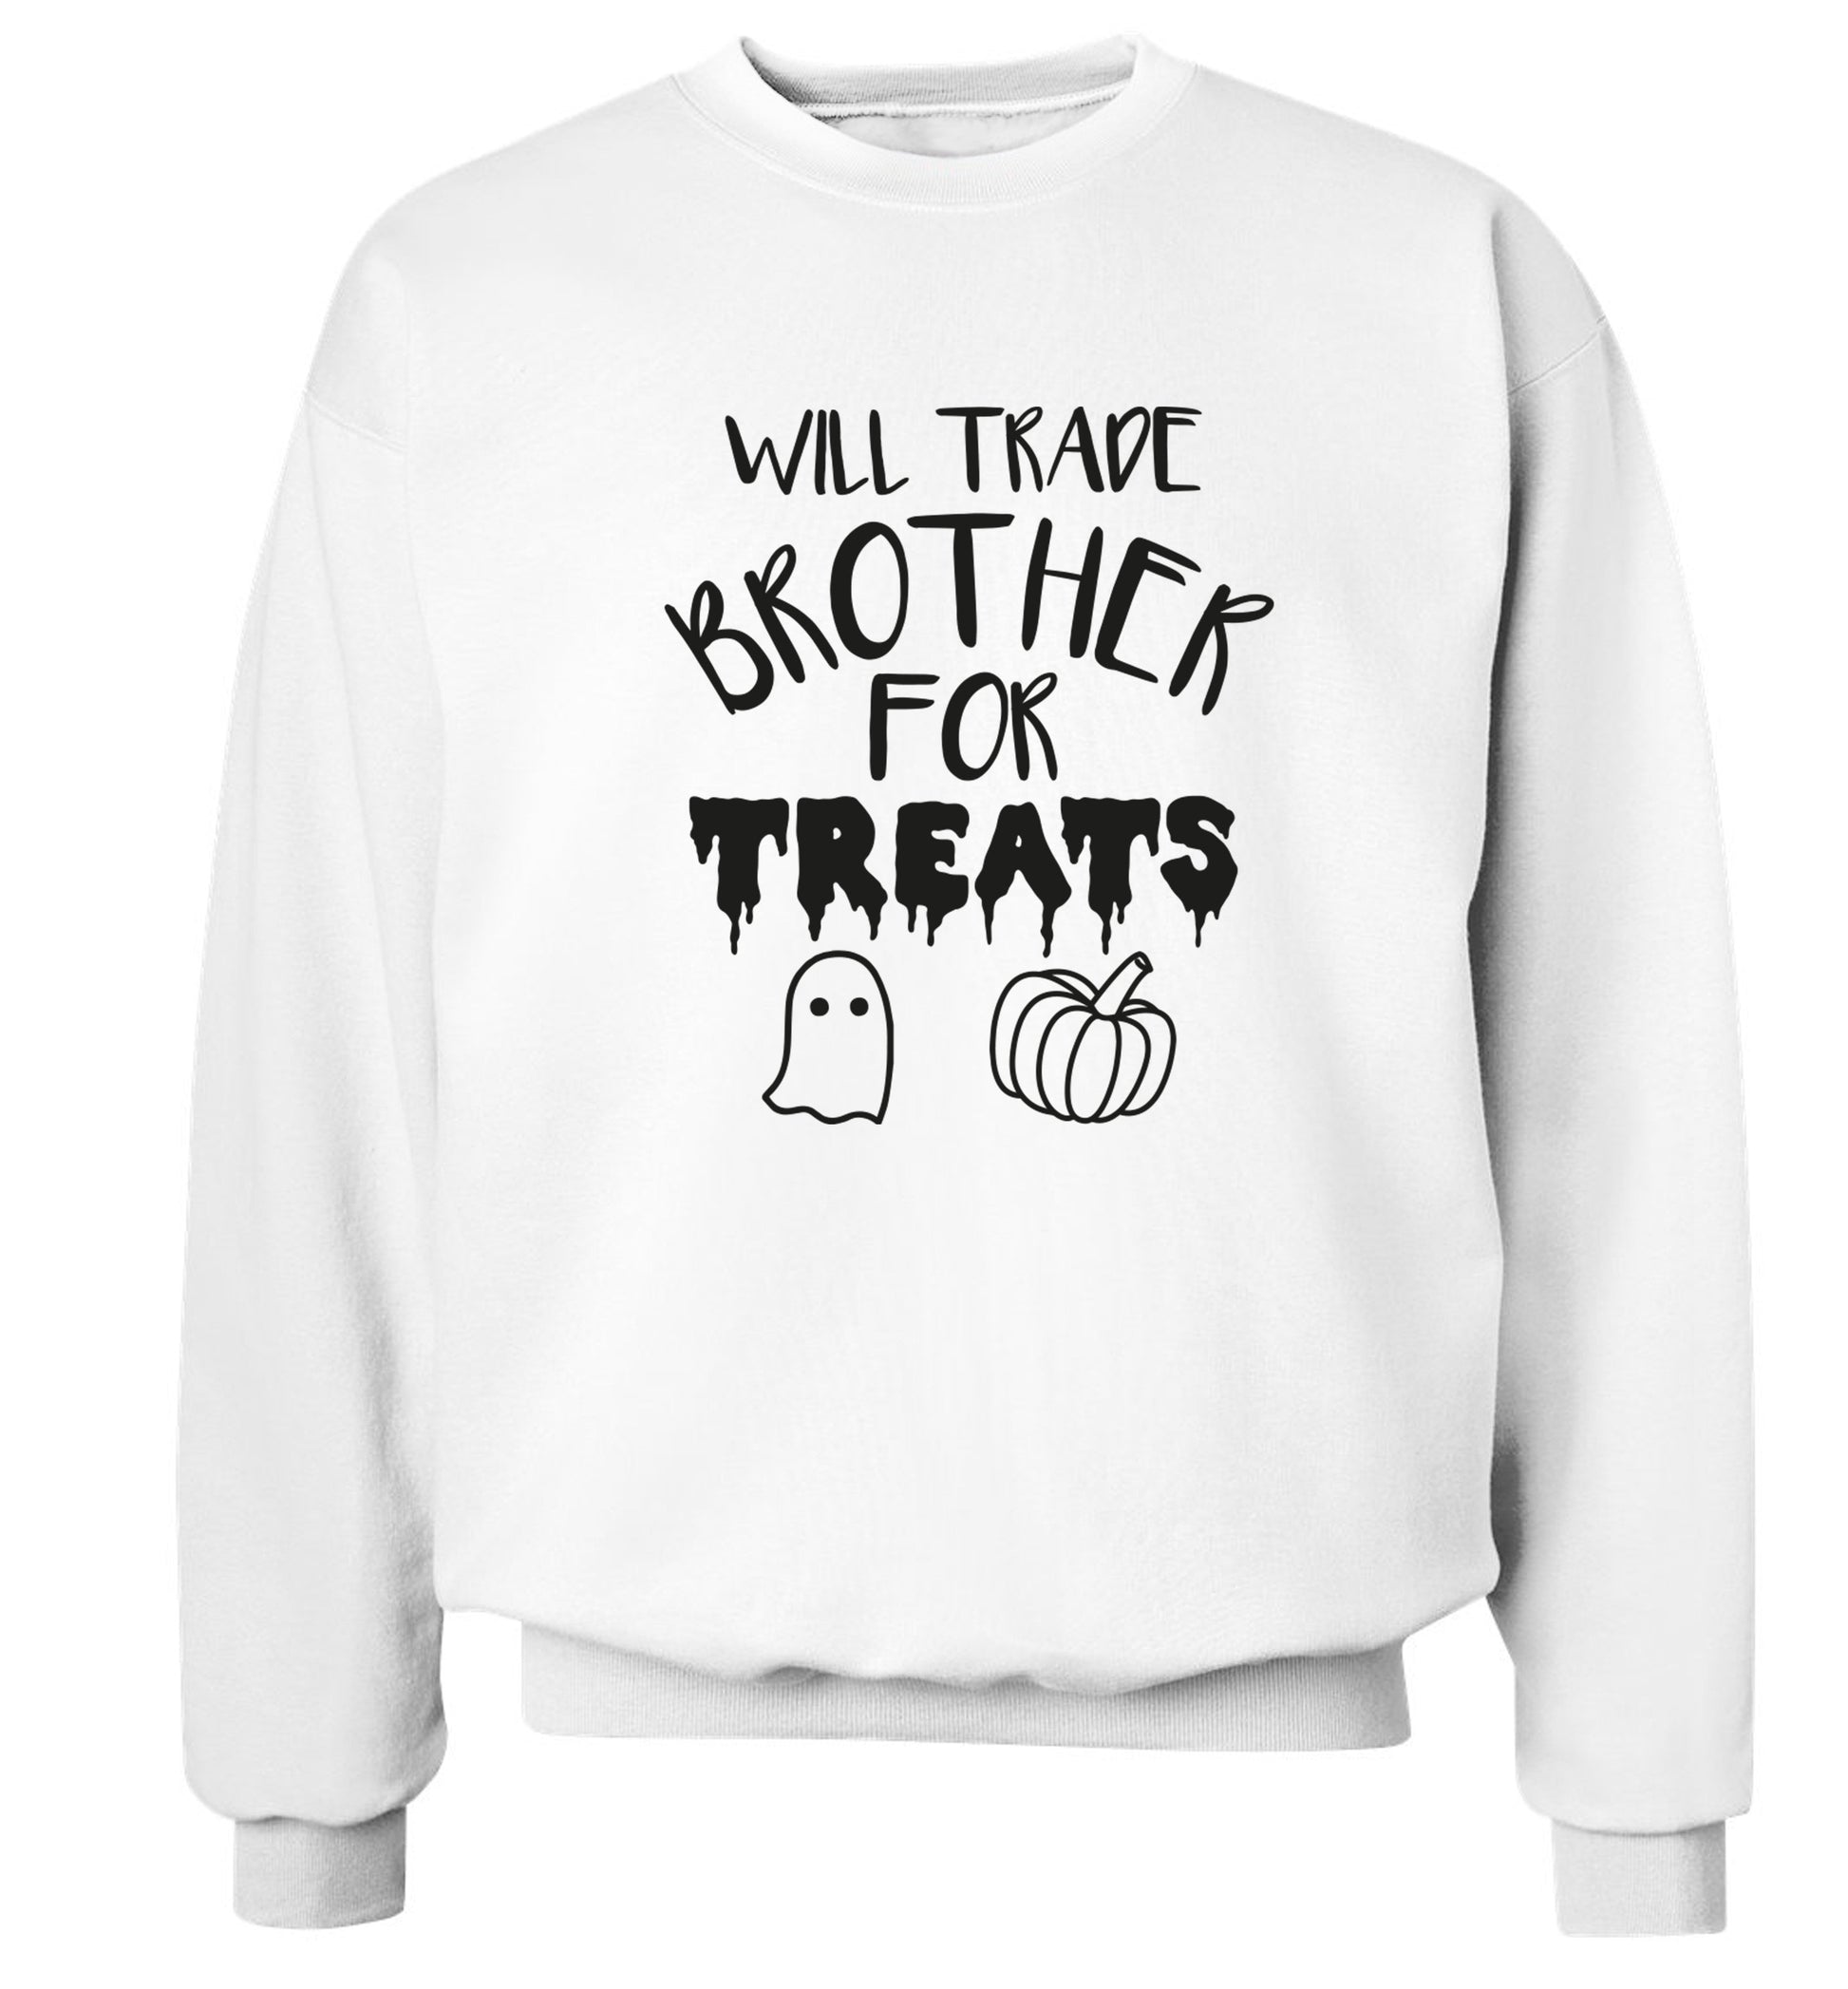 Will trade brother for treats Adult's unisex white Sweater 2XL